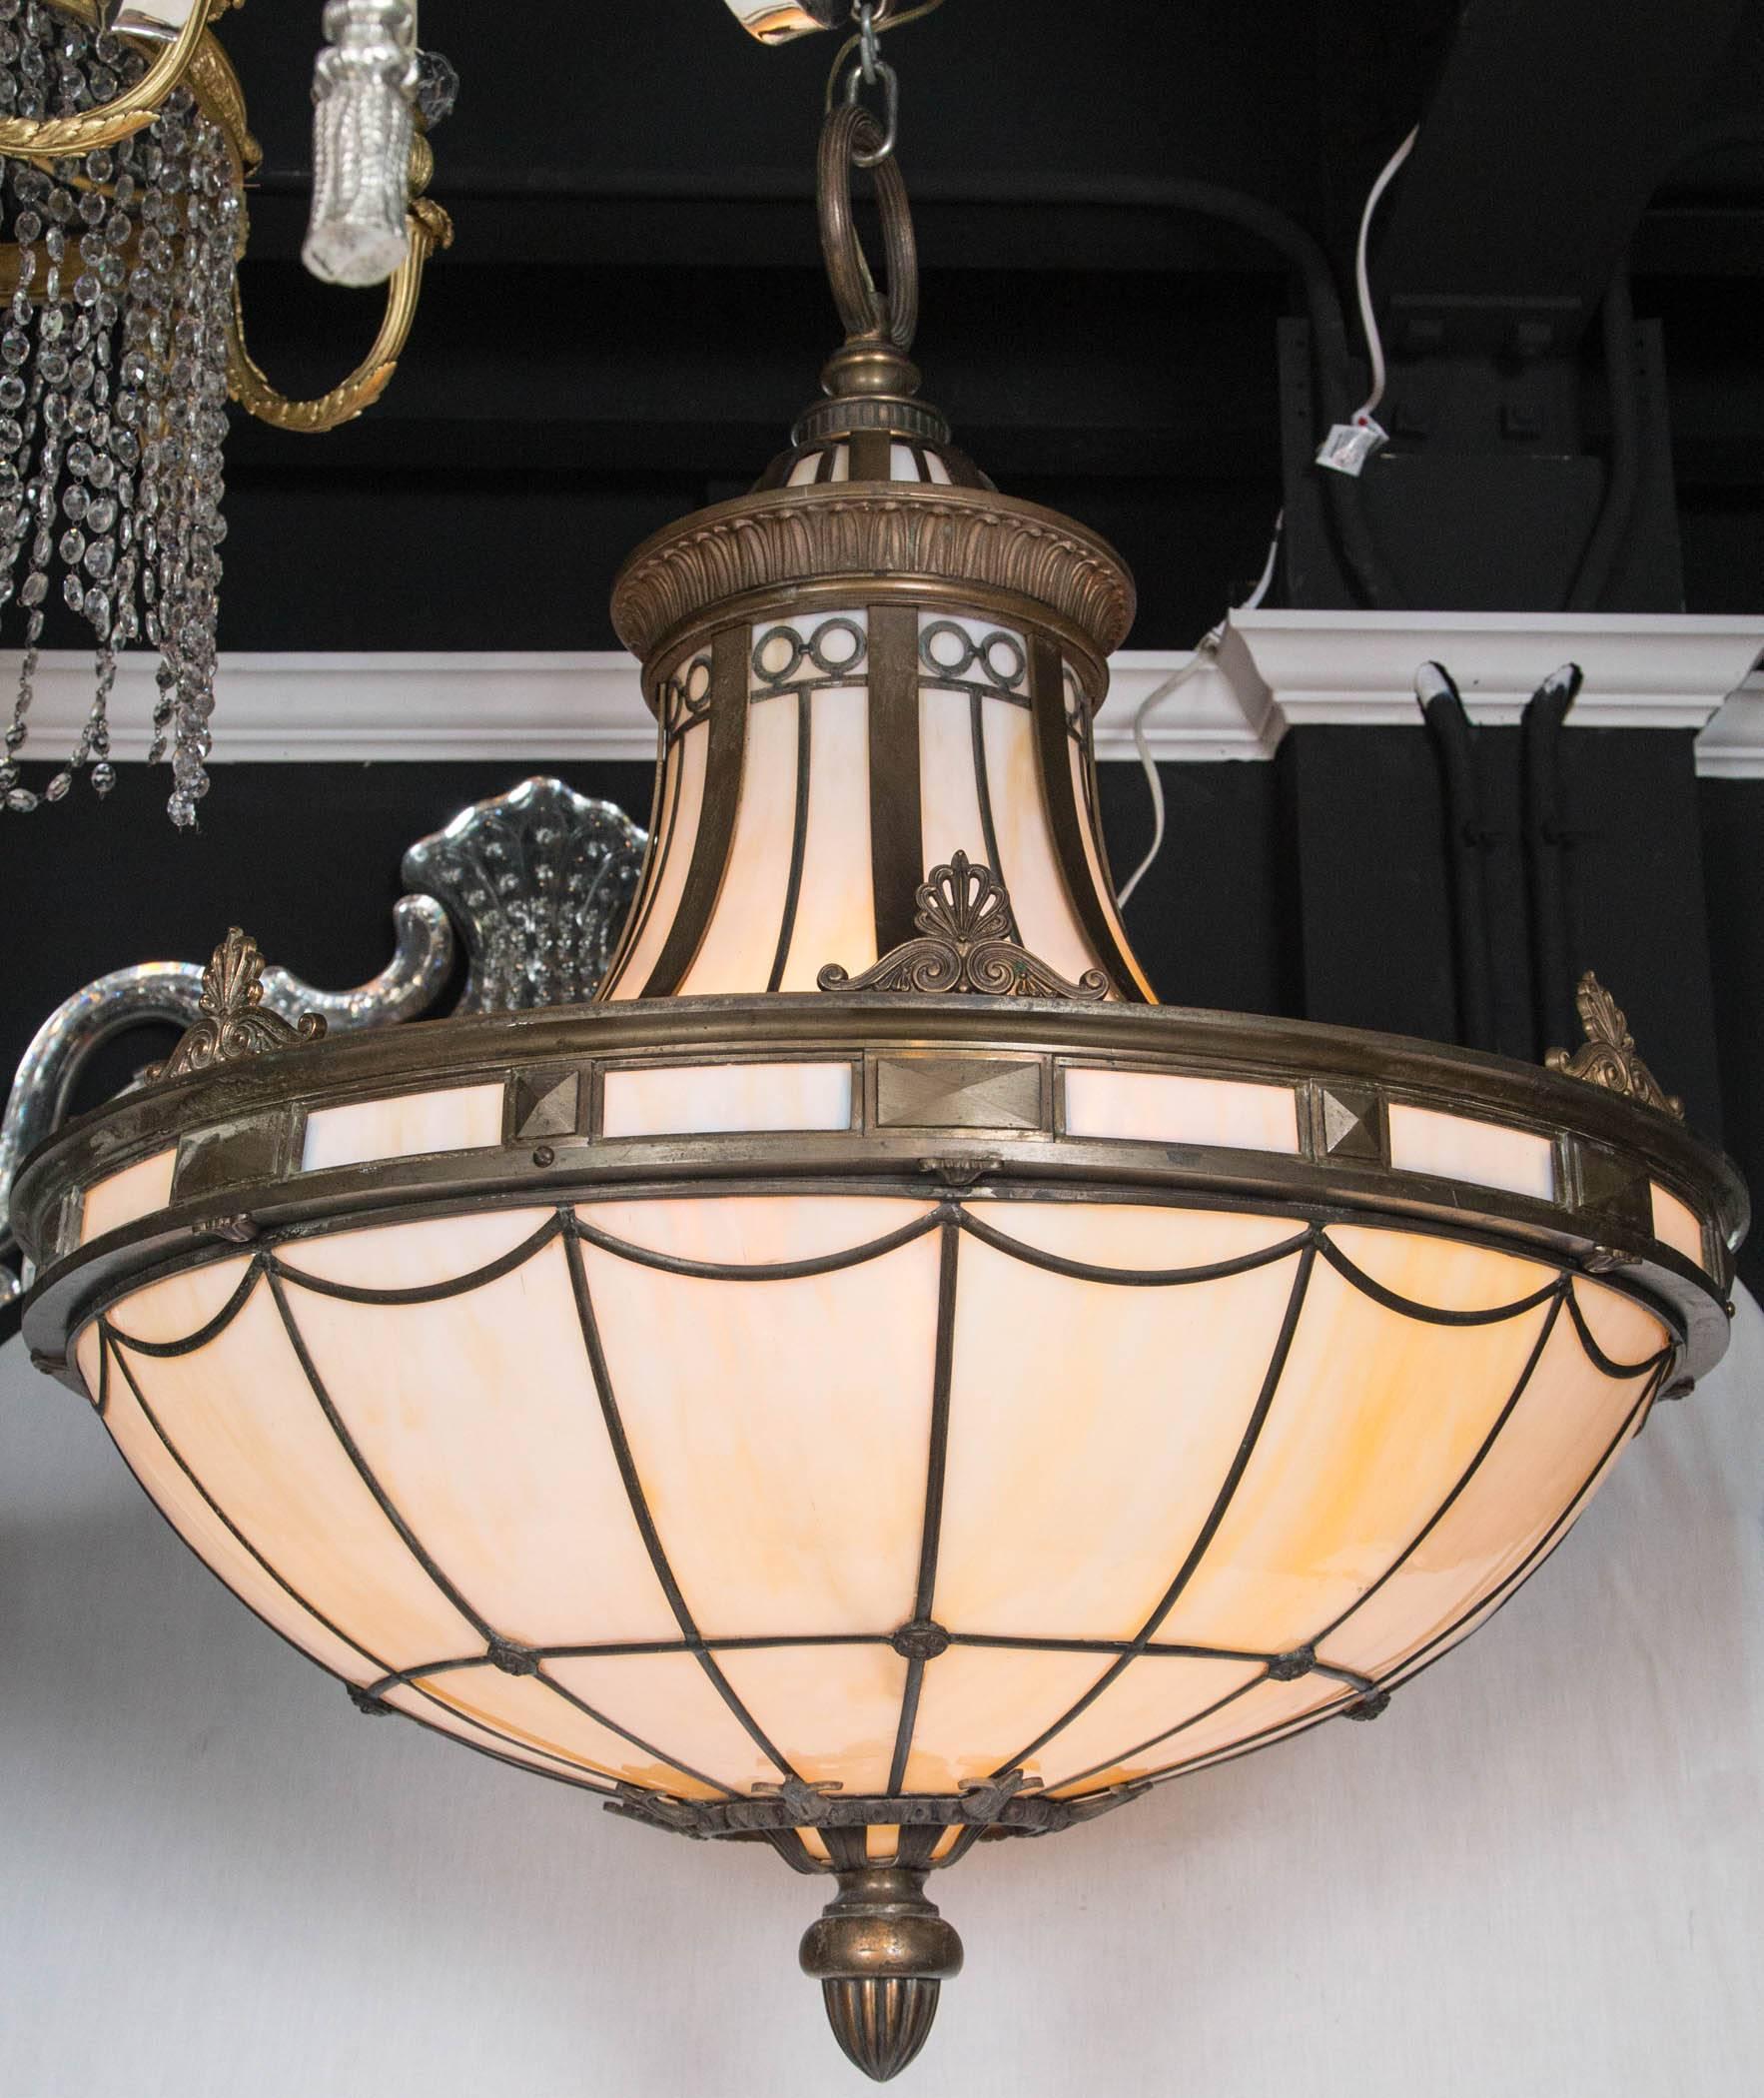 A Caldwell neoclassic style light fixture with interior lights, circa 1920.